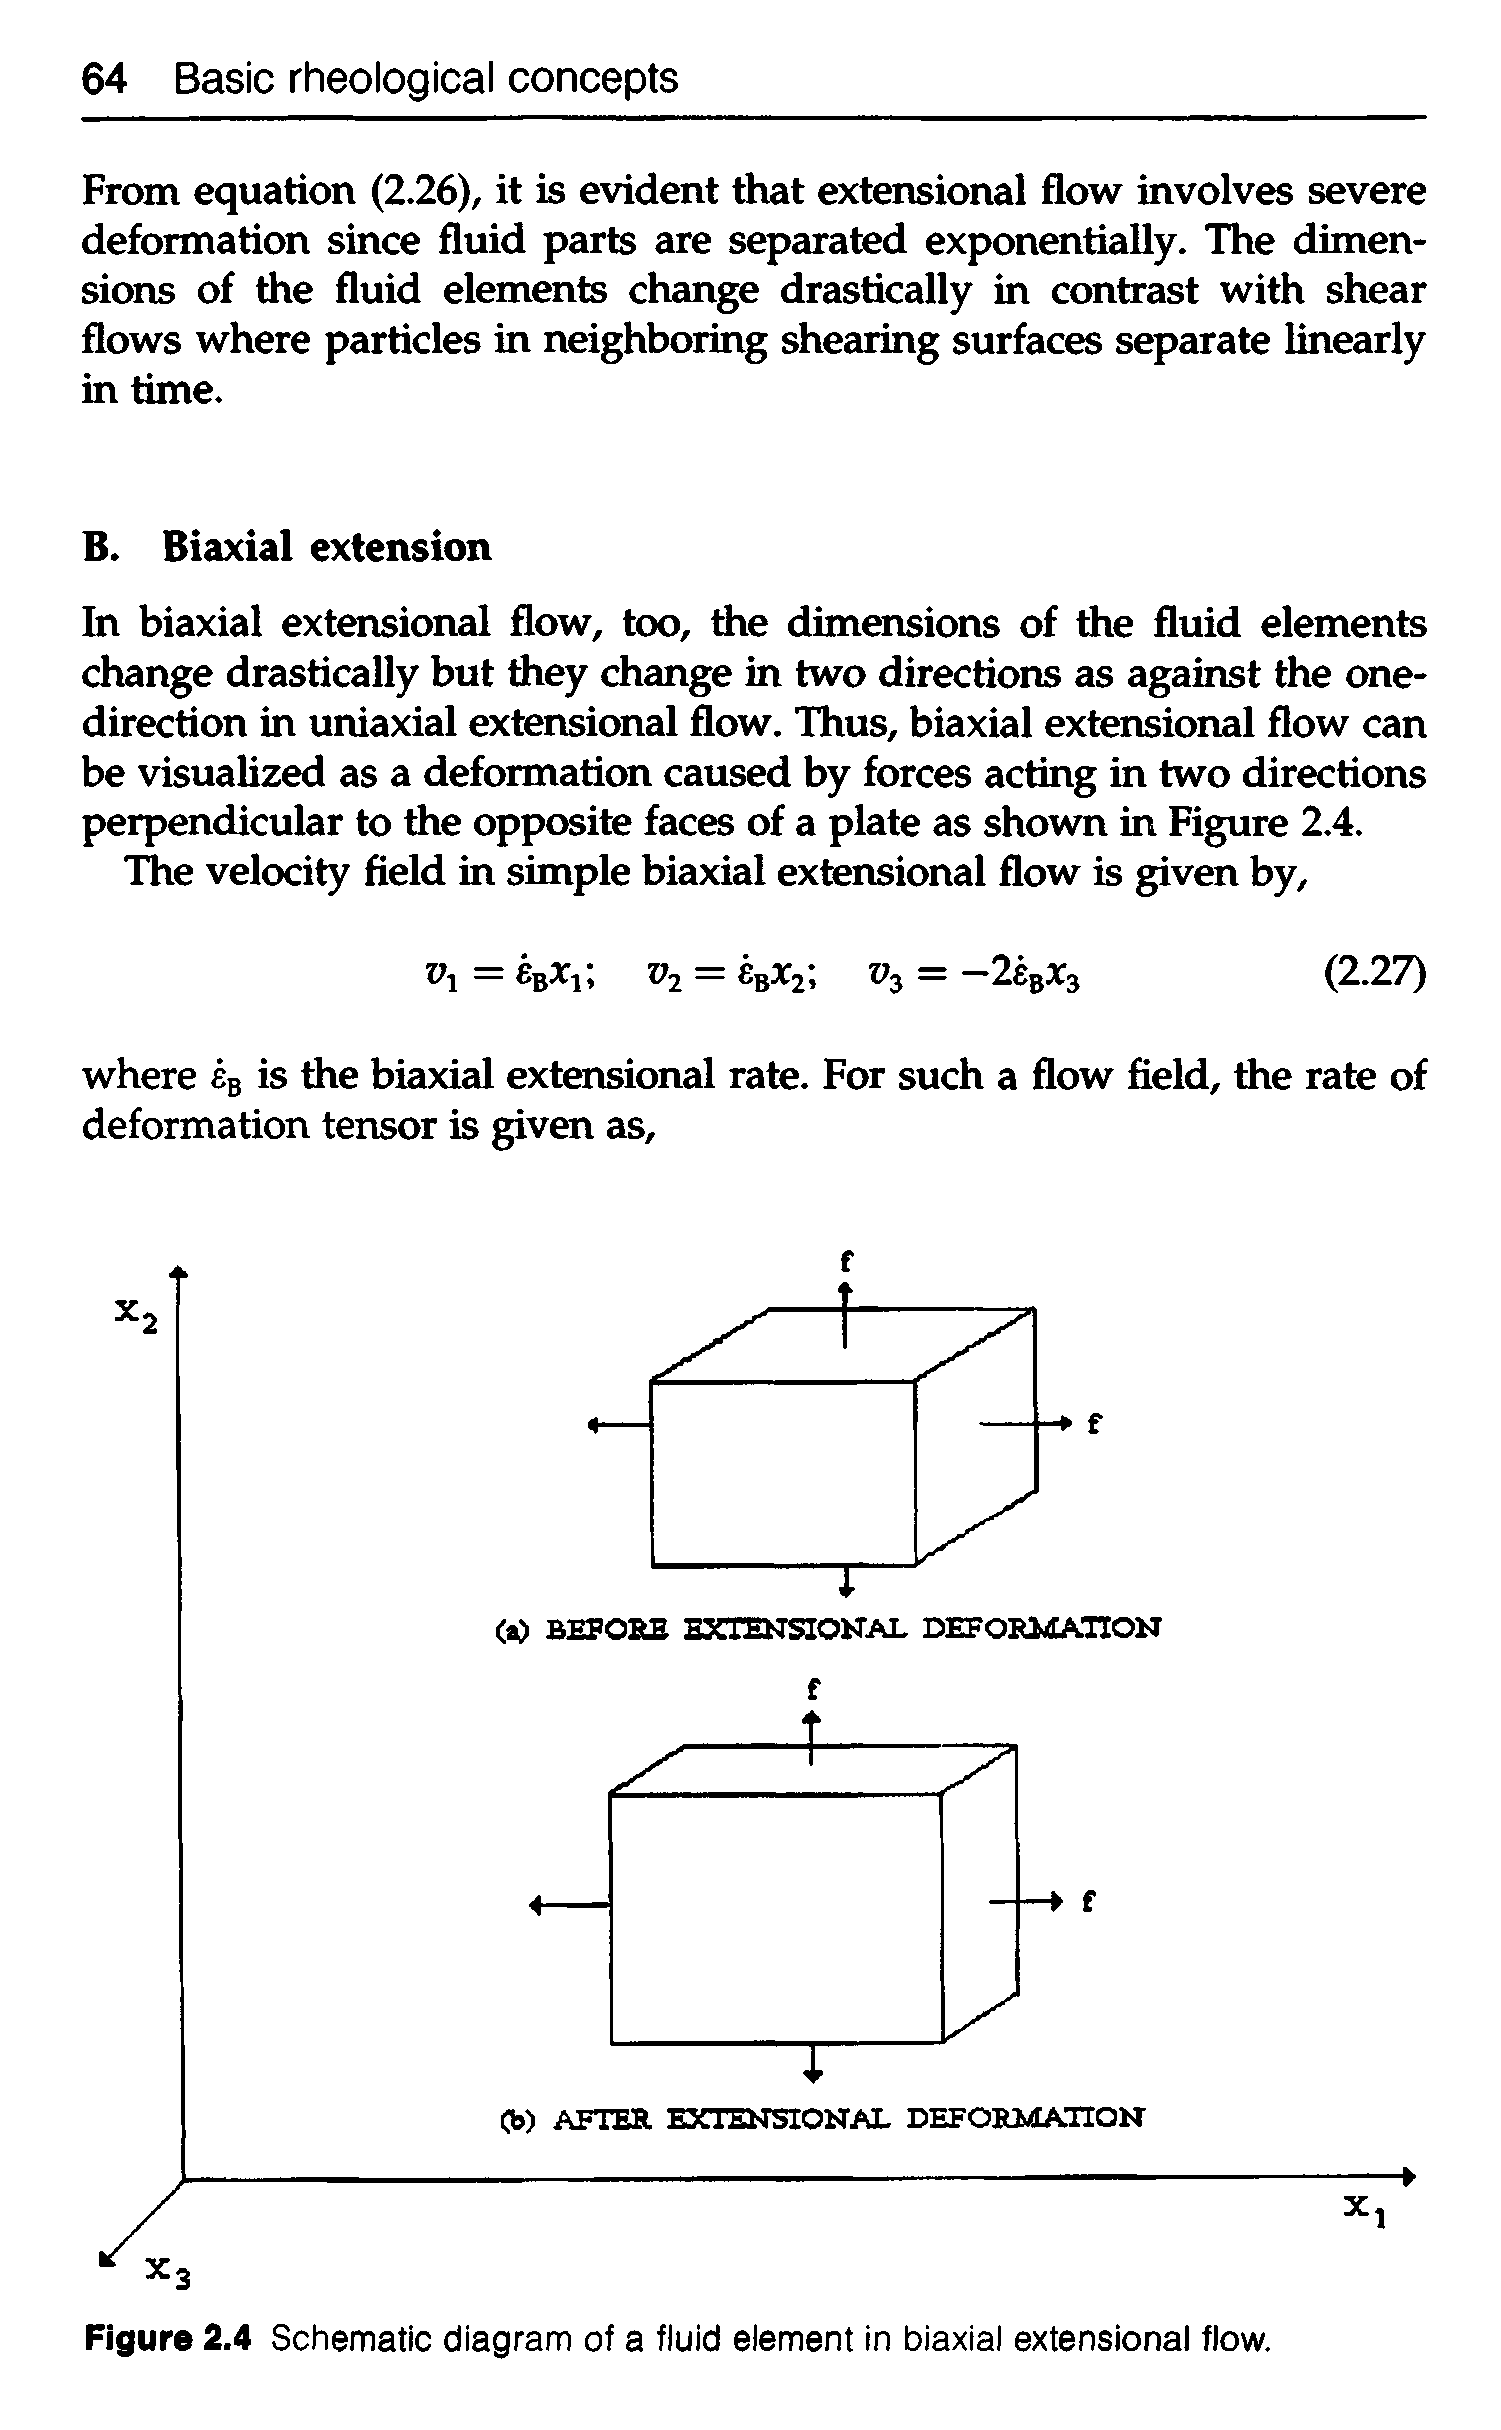 Figure 2.4 Schematic diagram of a fluid element in biaxial extensional flow.